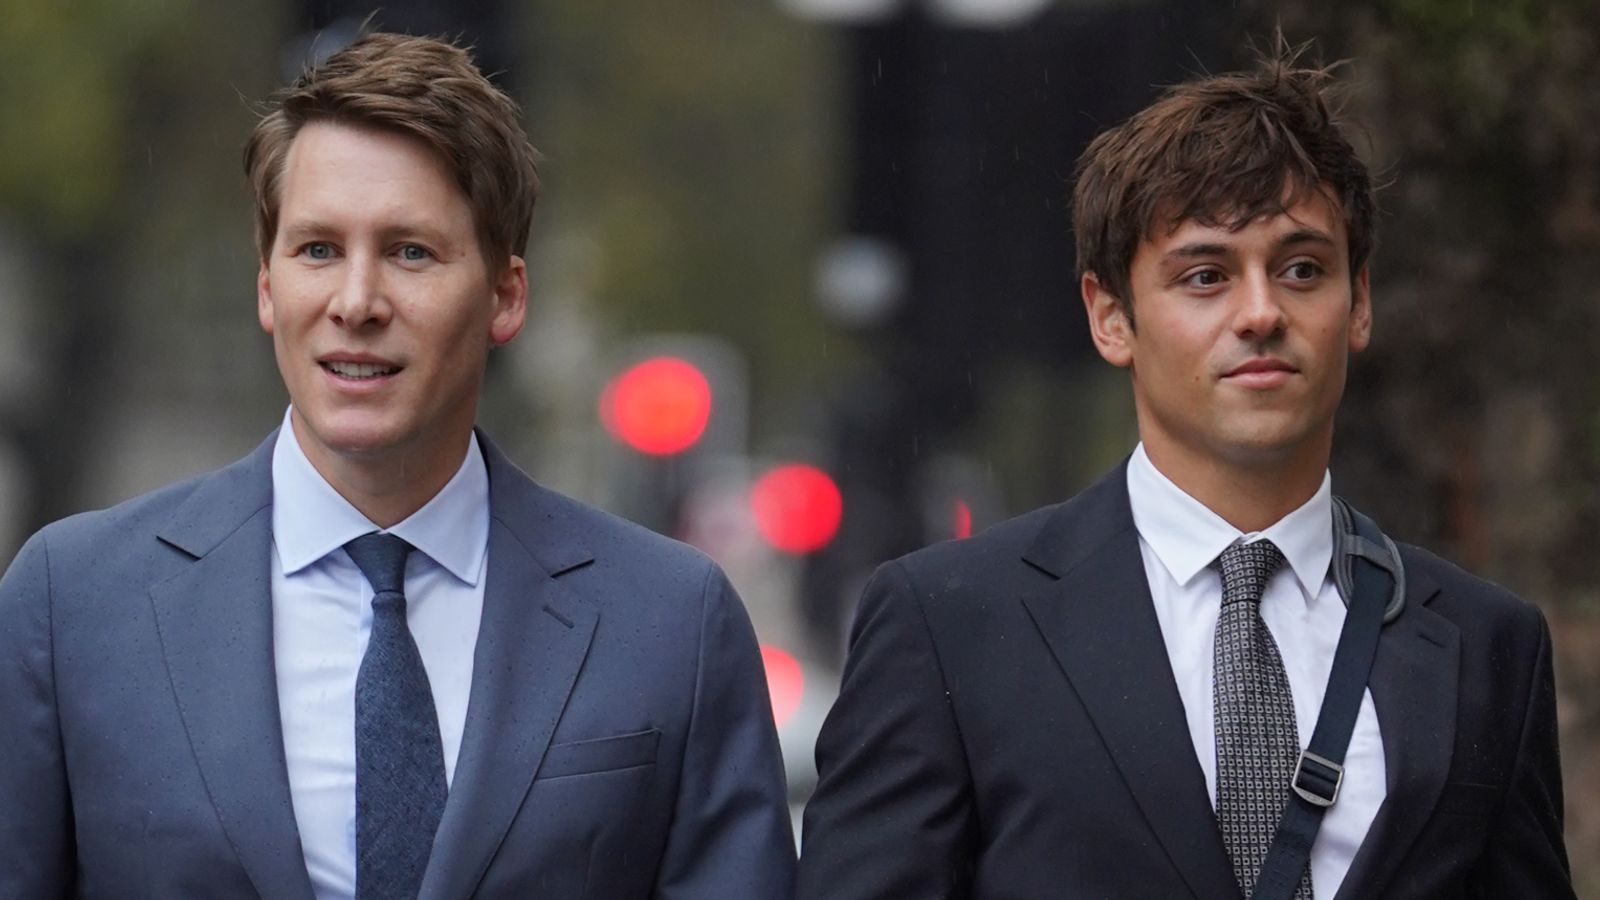 Tom Daley's husband Dustin Lance Black cleared of assaulting woman in nightclub